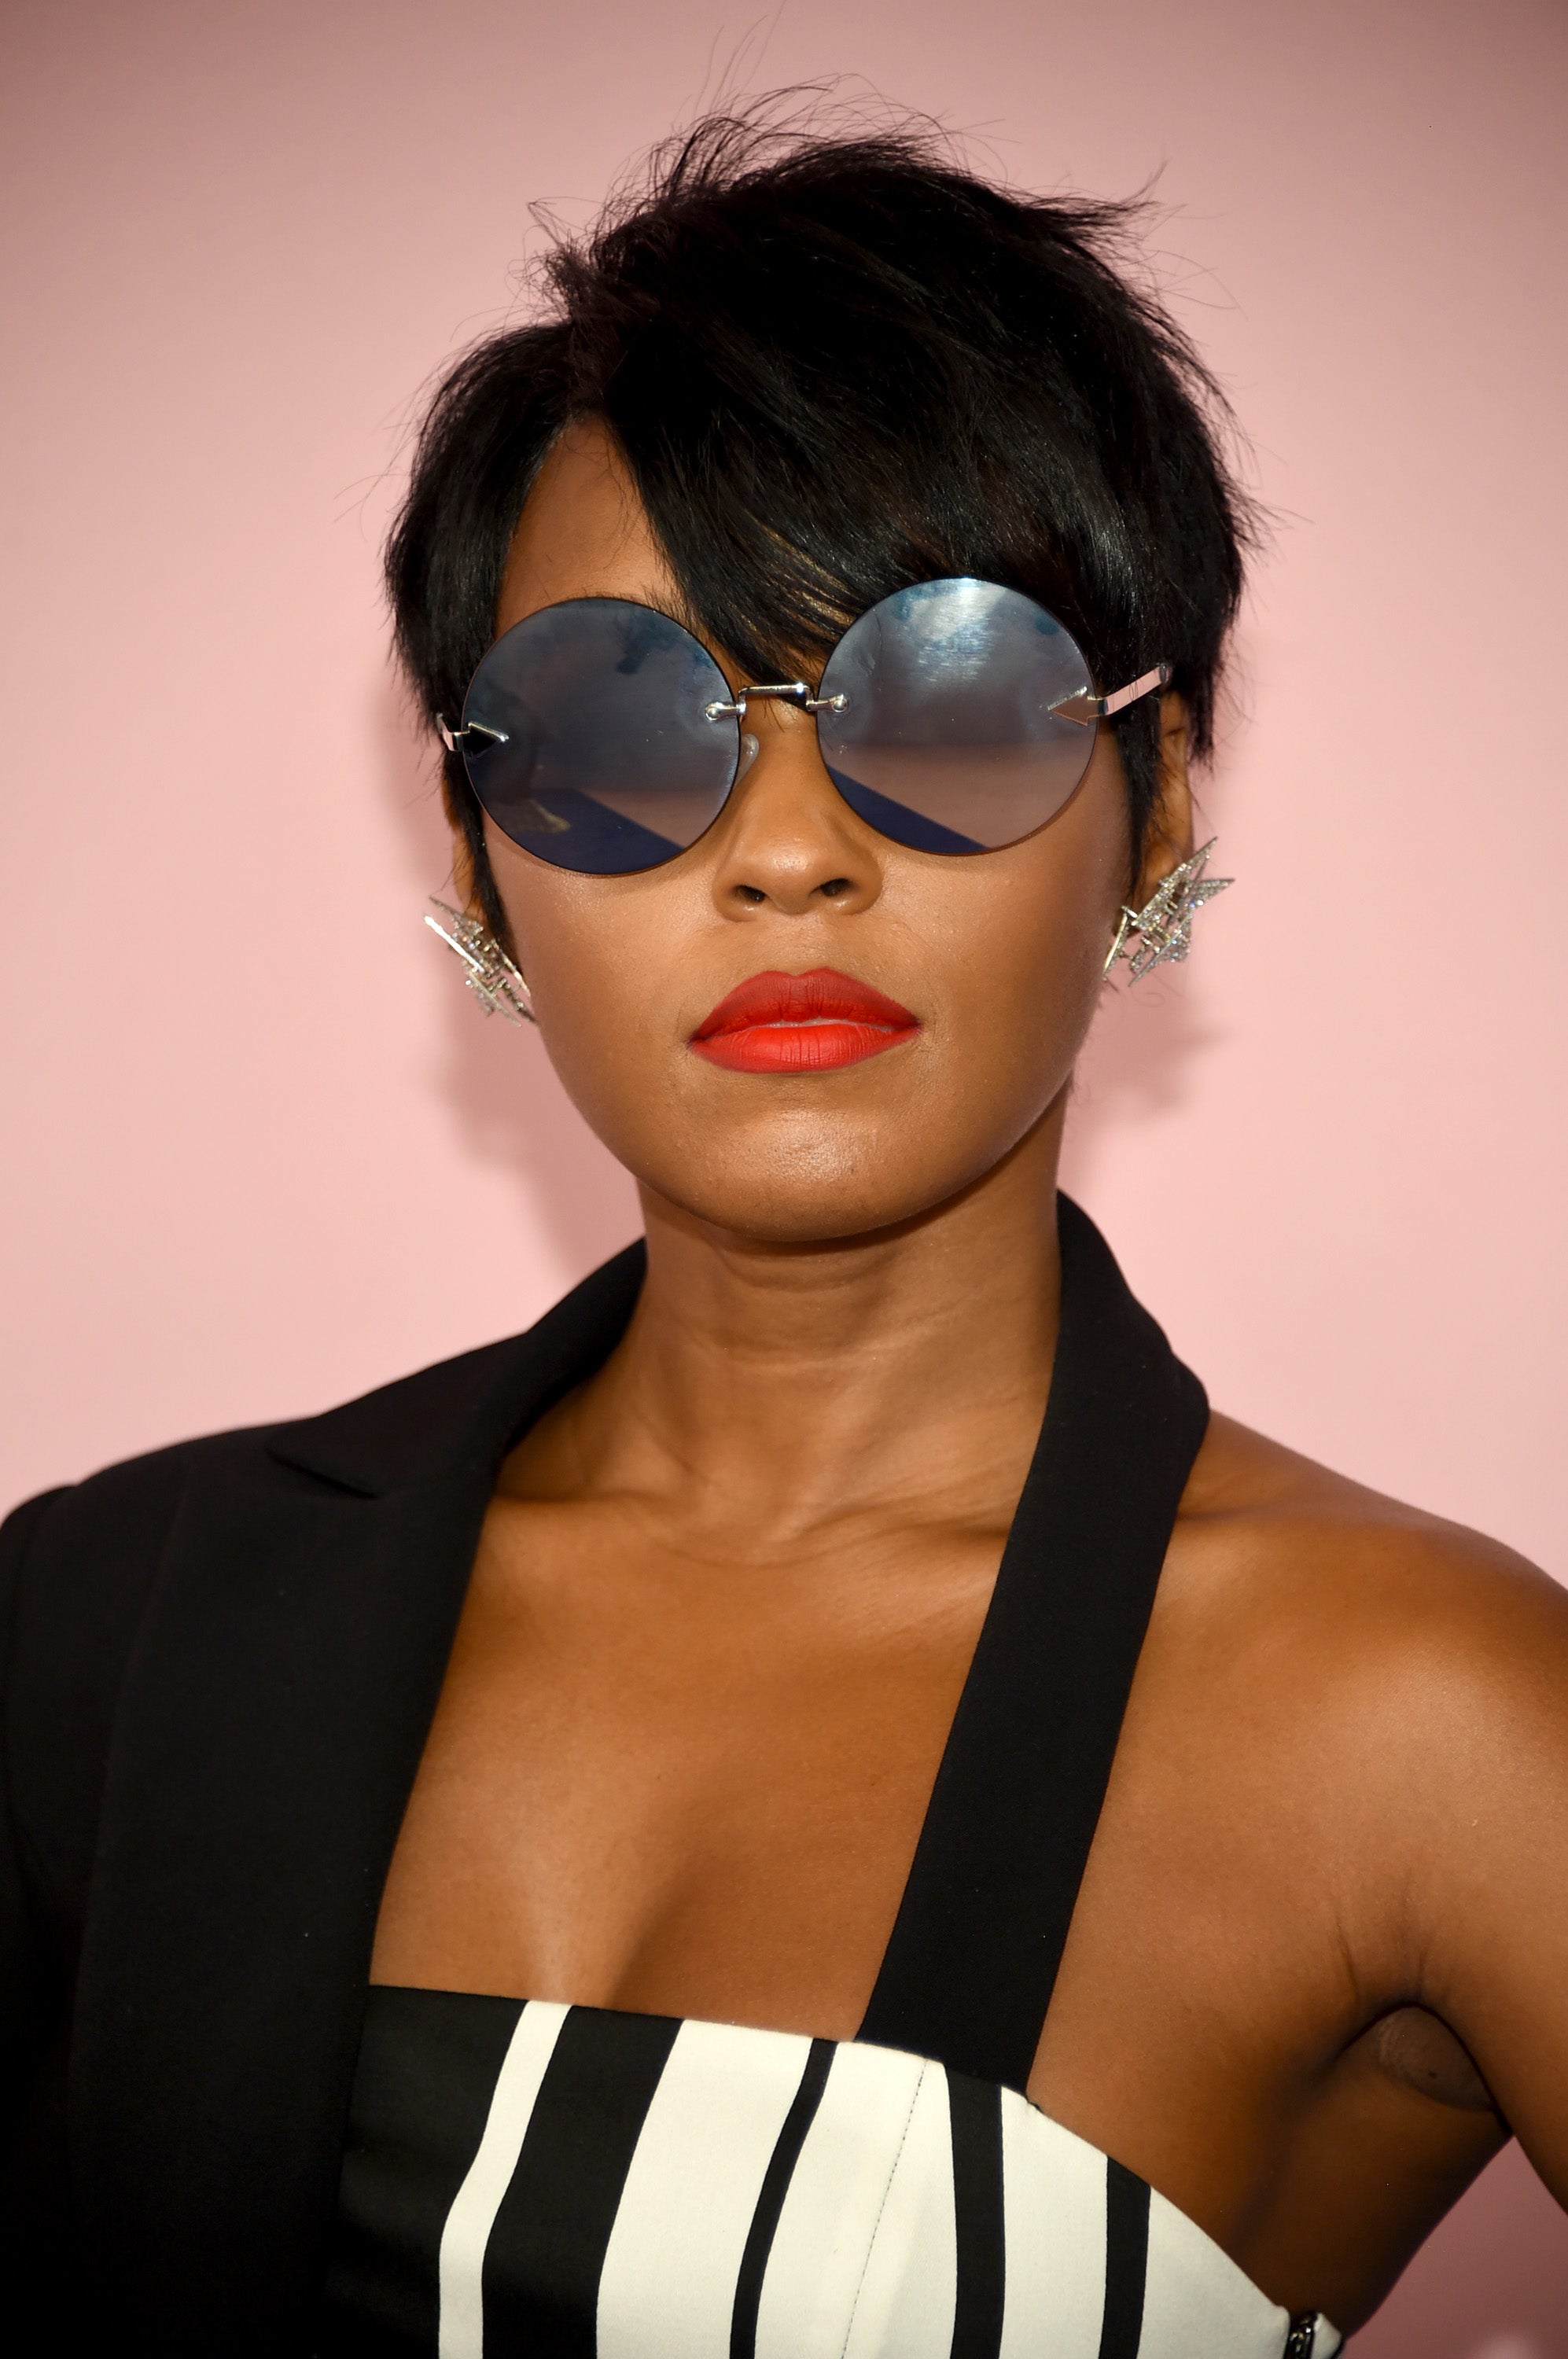 Janelle Monáe: 'There Is Not A Moment Or A Day That Goes By That I Don't Miss Prince'
